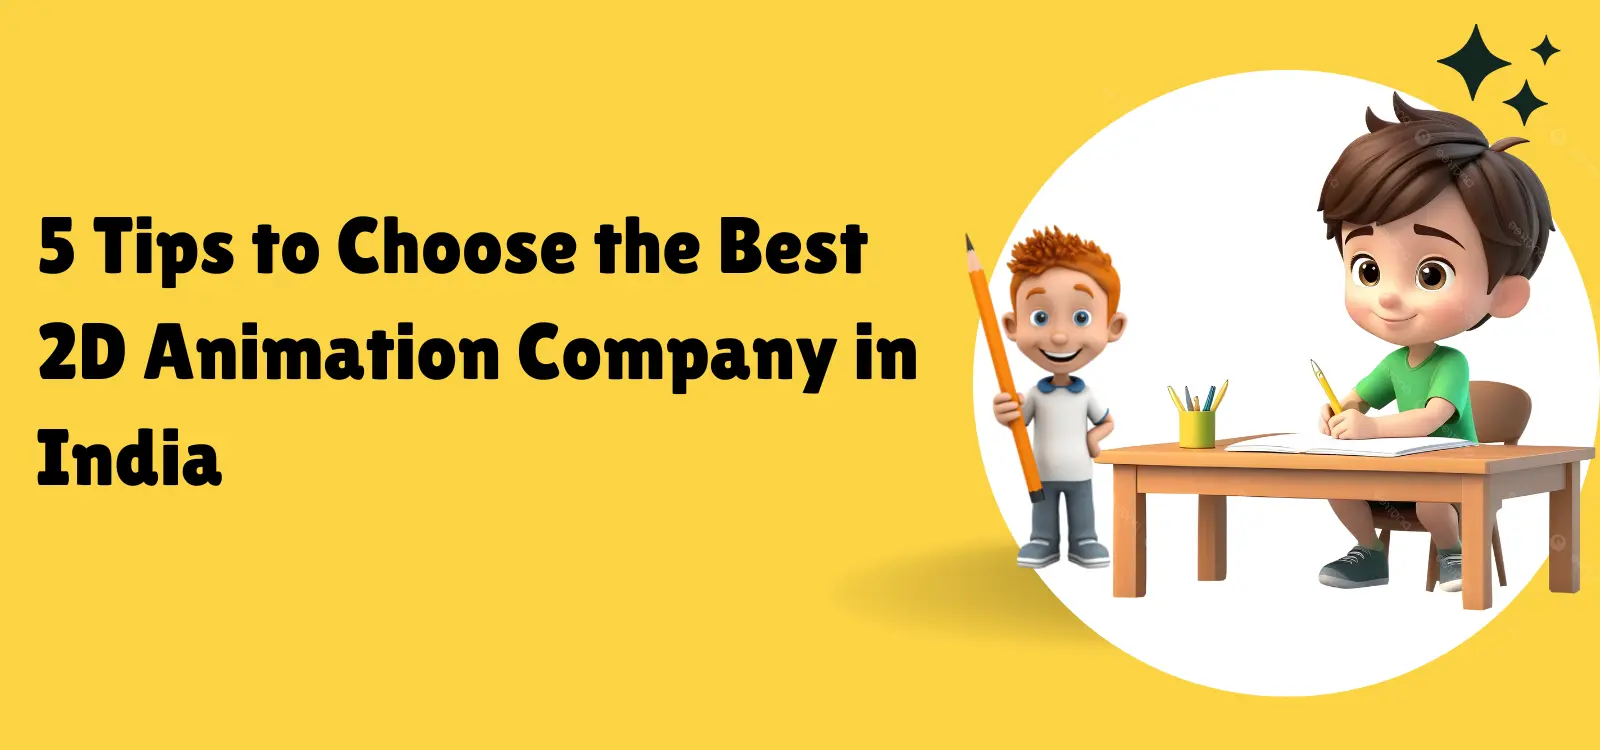 5 Tips to Choose the Best 2D Animation Companies in India